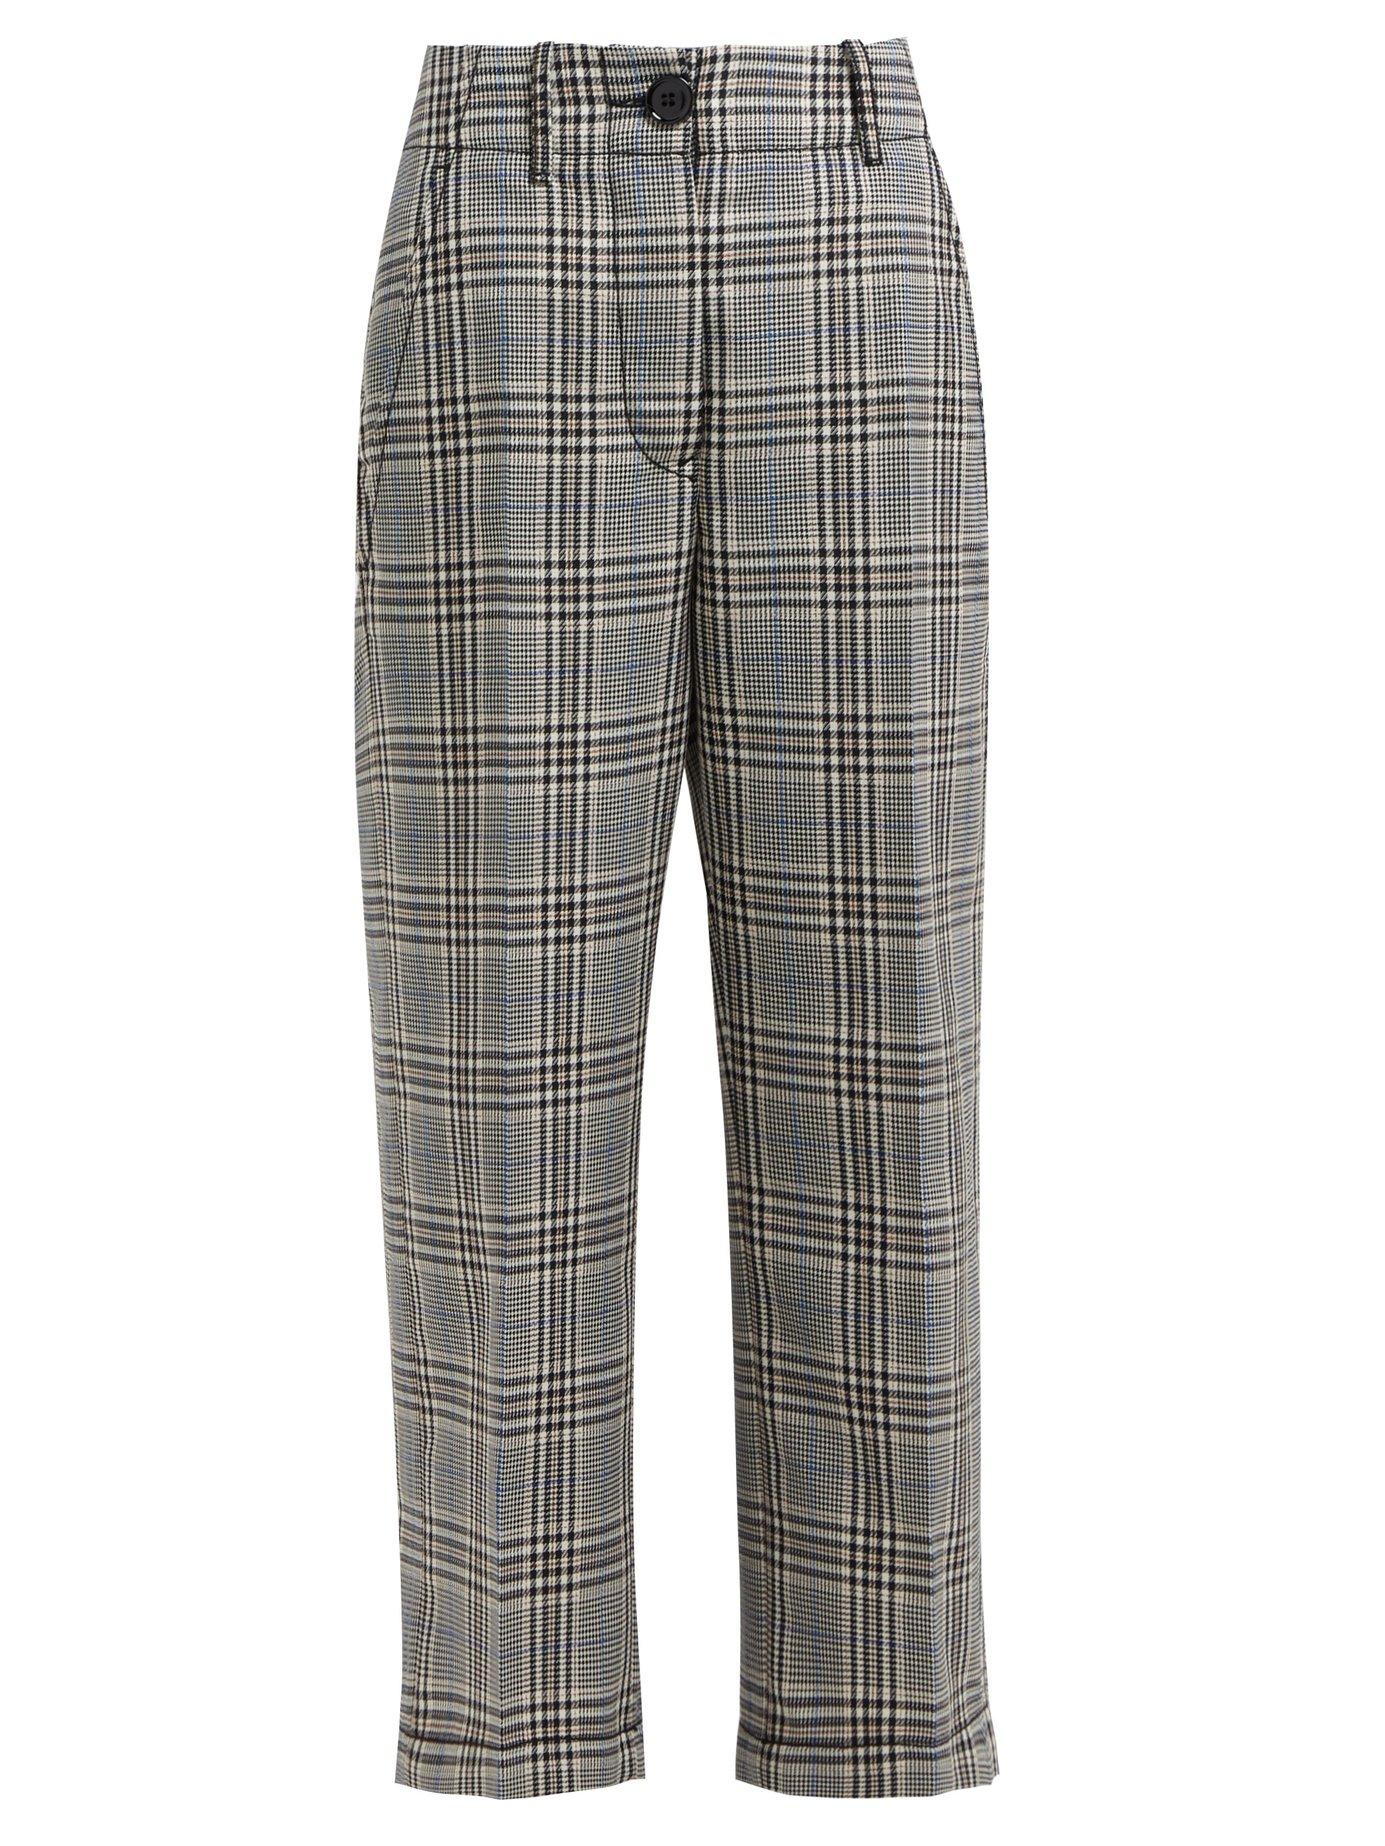 MM6 by Maison Martin Margiela Houndstooth Wool Blend Trousers in Gray ...